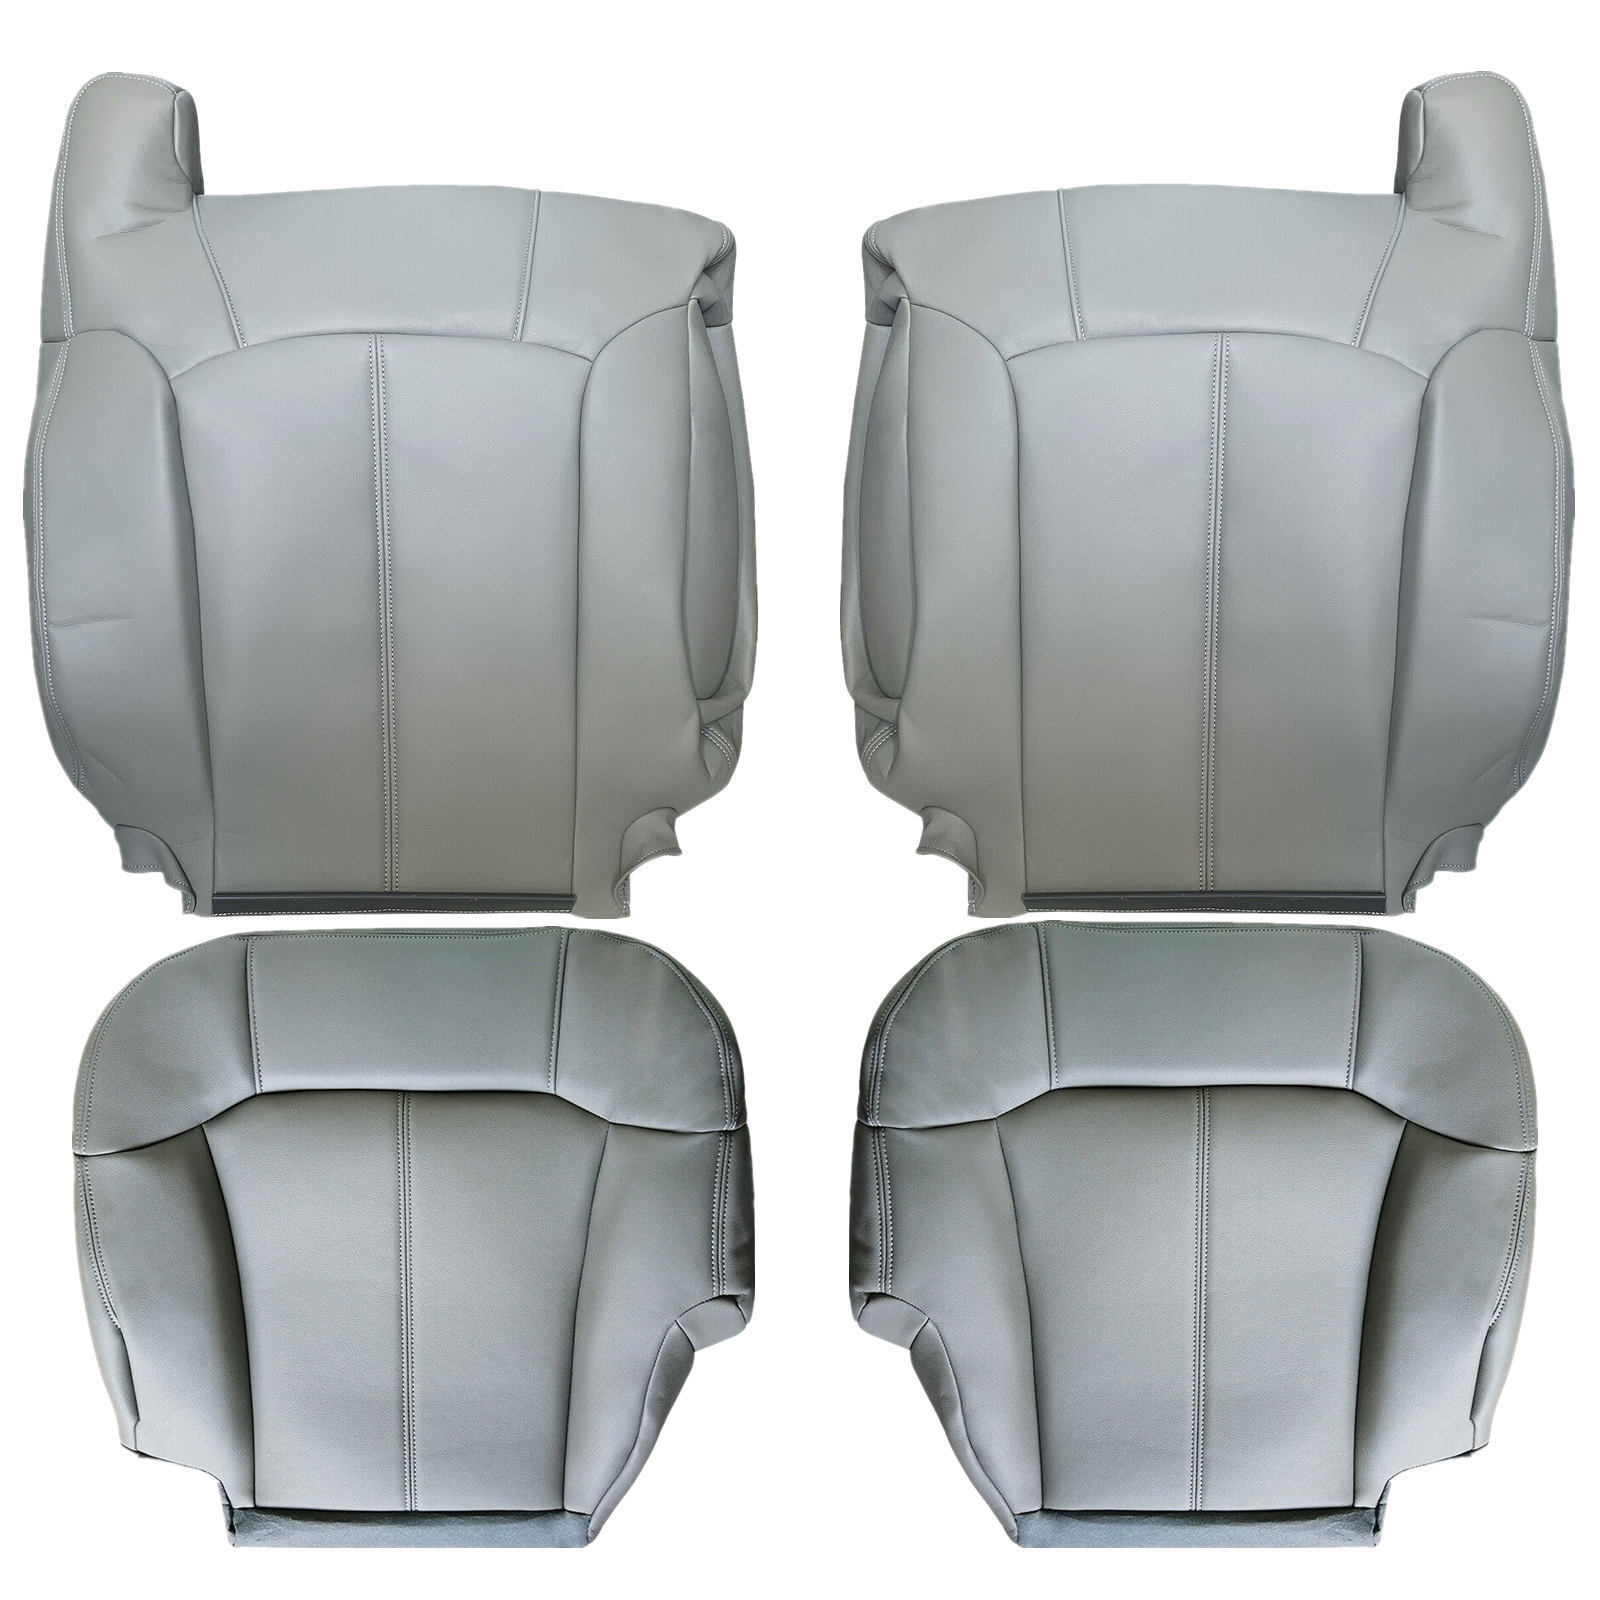 For 1999 2000 2001 2002 Chevy Silverado Tahoe Suburban Leather Seat Covers Gray